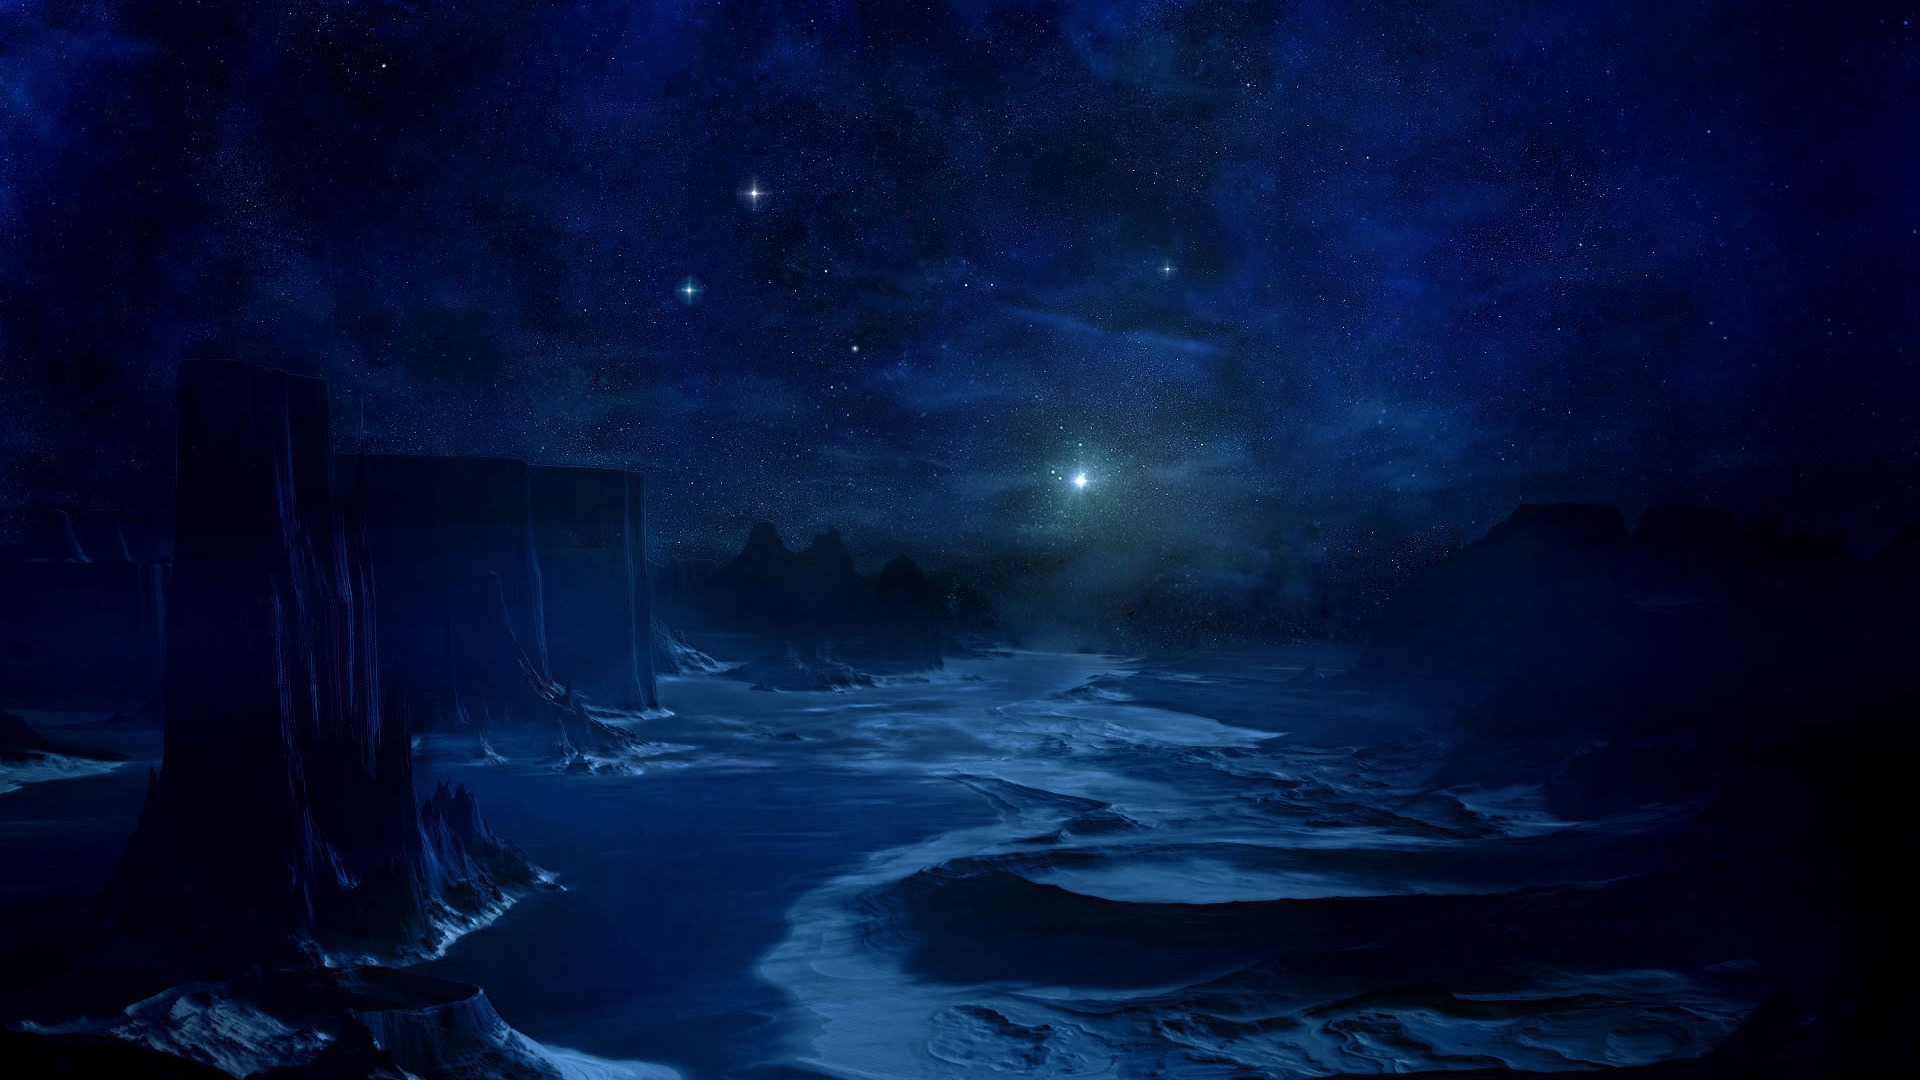 The Blue Cold Night for 1920 x 1080 HDTV 1080p resolution